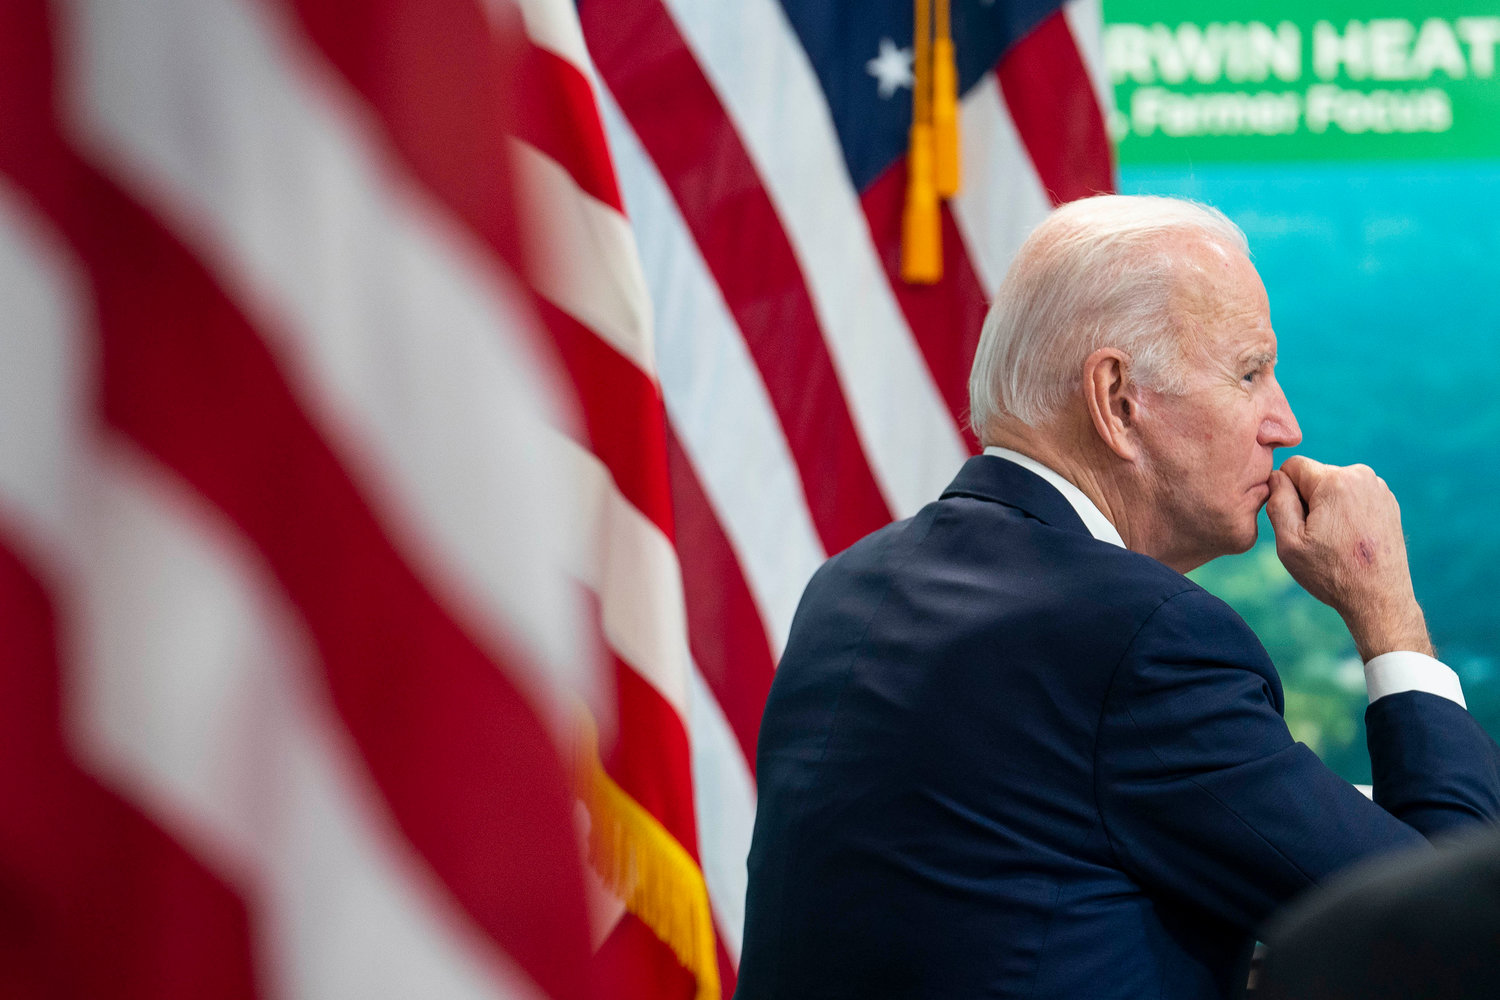 President Joe Biden listens during a virtual meeting in the South Court Auditorium at the Eisenhower Executive Office Building on Jan. 3, 2022, in Washington, D.C. (Sarah Silbiger/Getty Images/TNS)